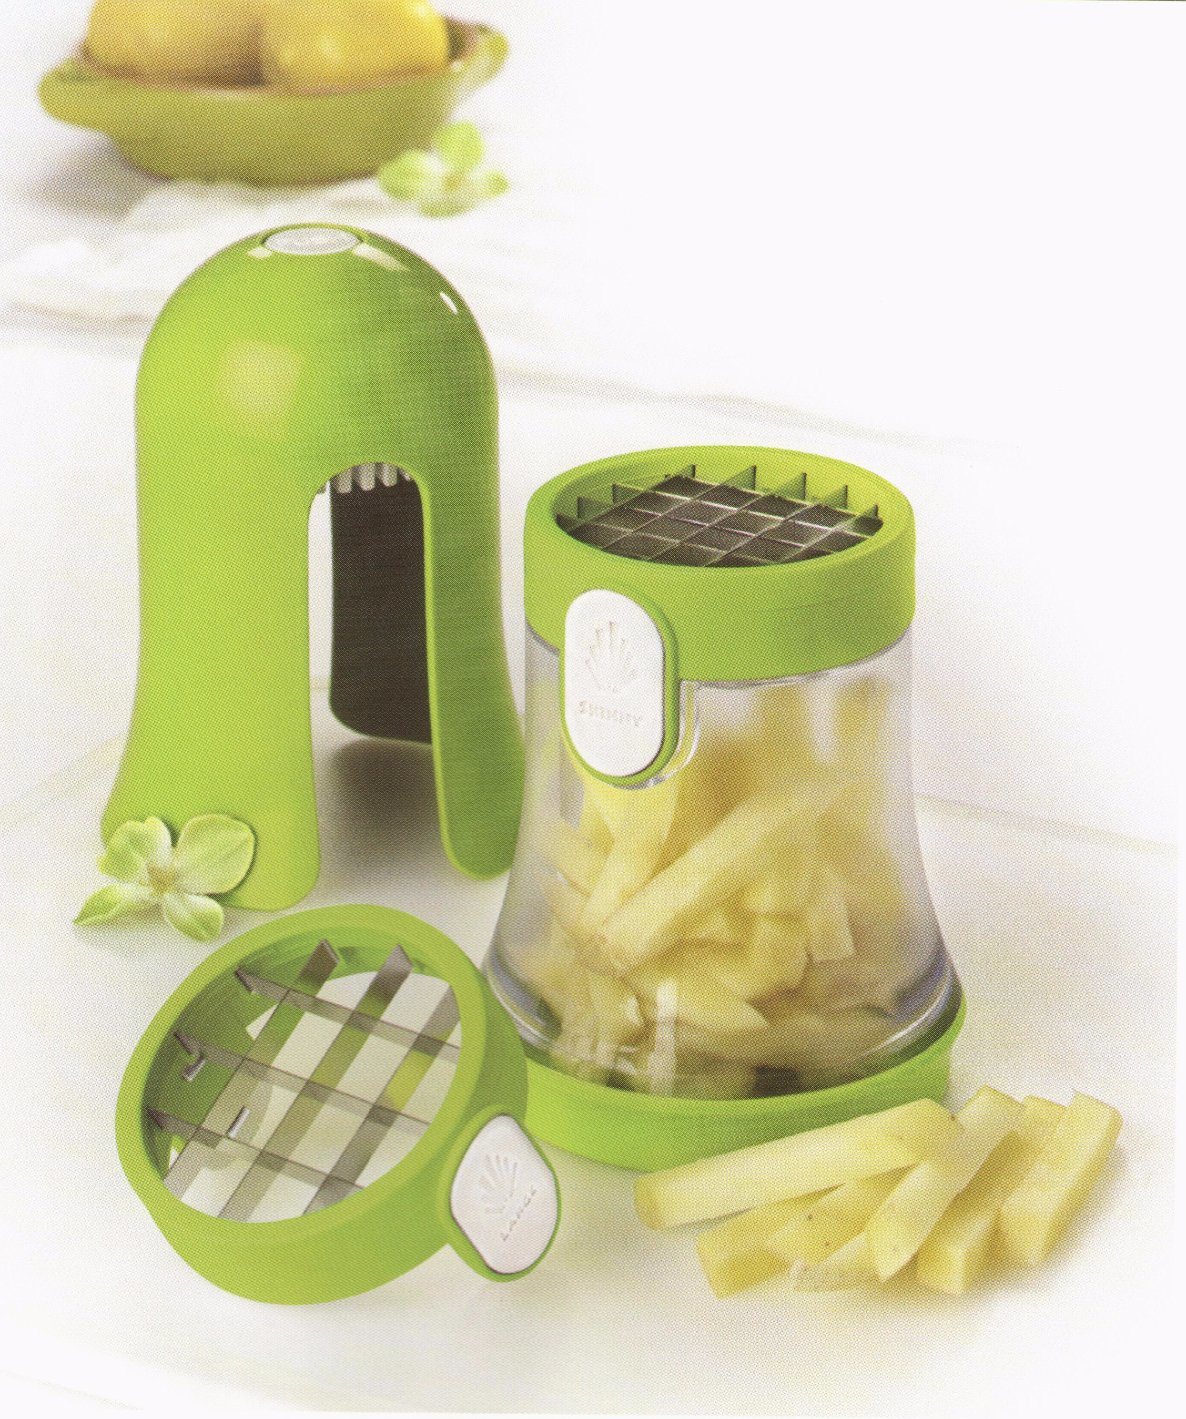 Short Lead Time for Kitchen Utensils For Men -
 2 in 1 Fashion Plastic Vegetable Cutting Food Chopper Dice and Slice Machine Cg074 – Long Prosper